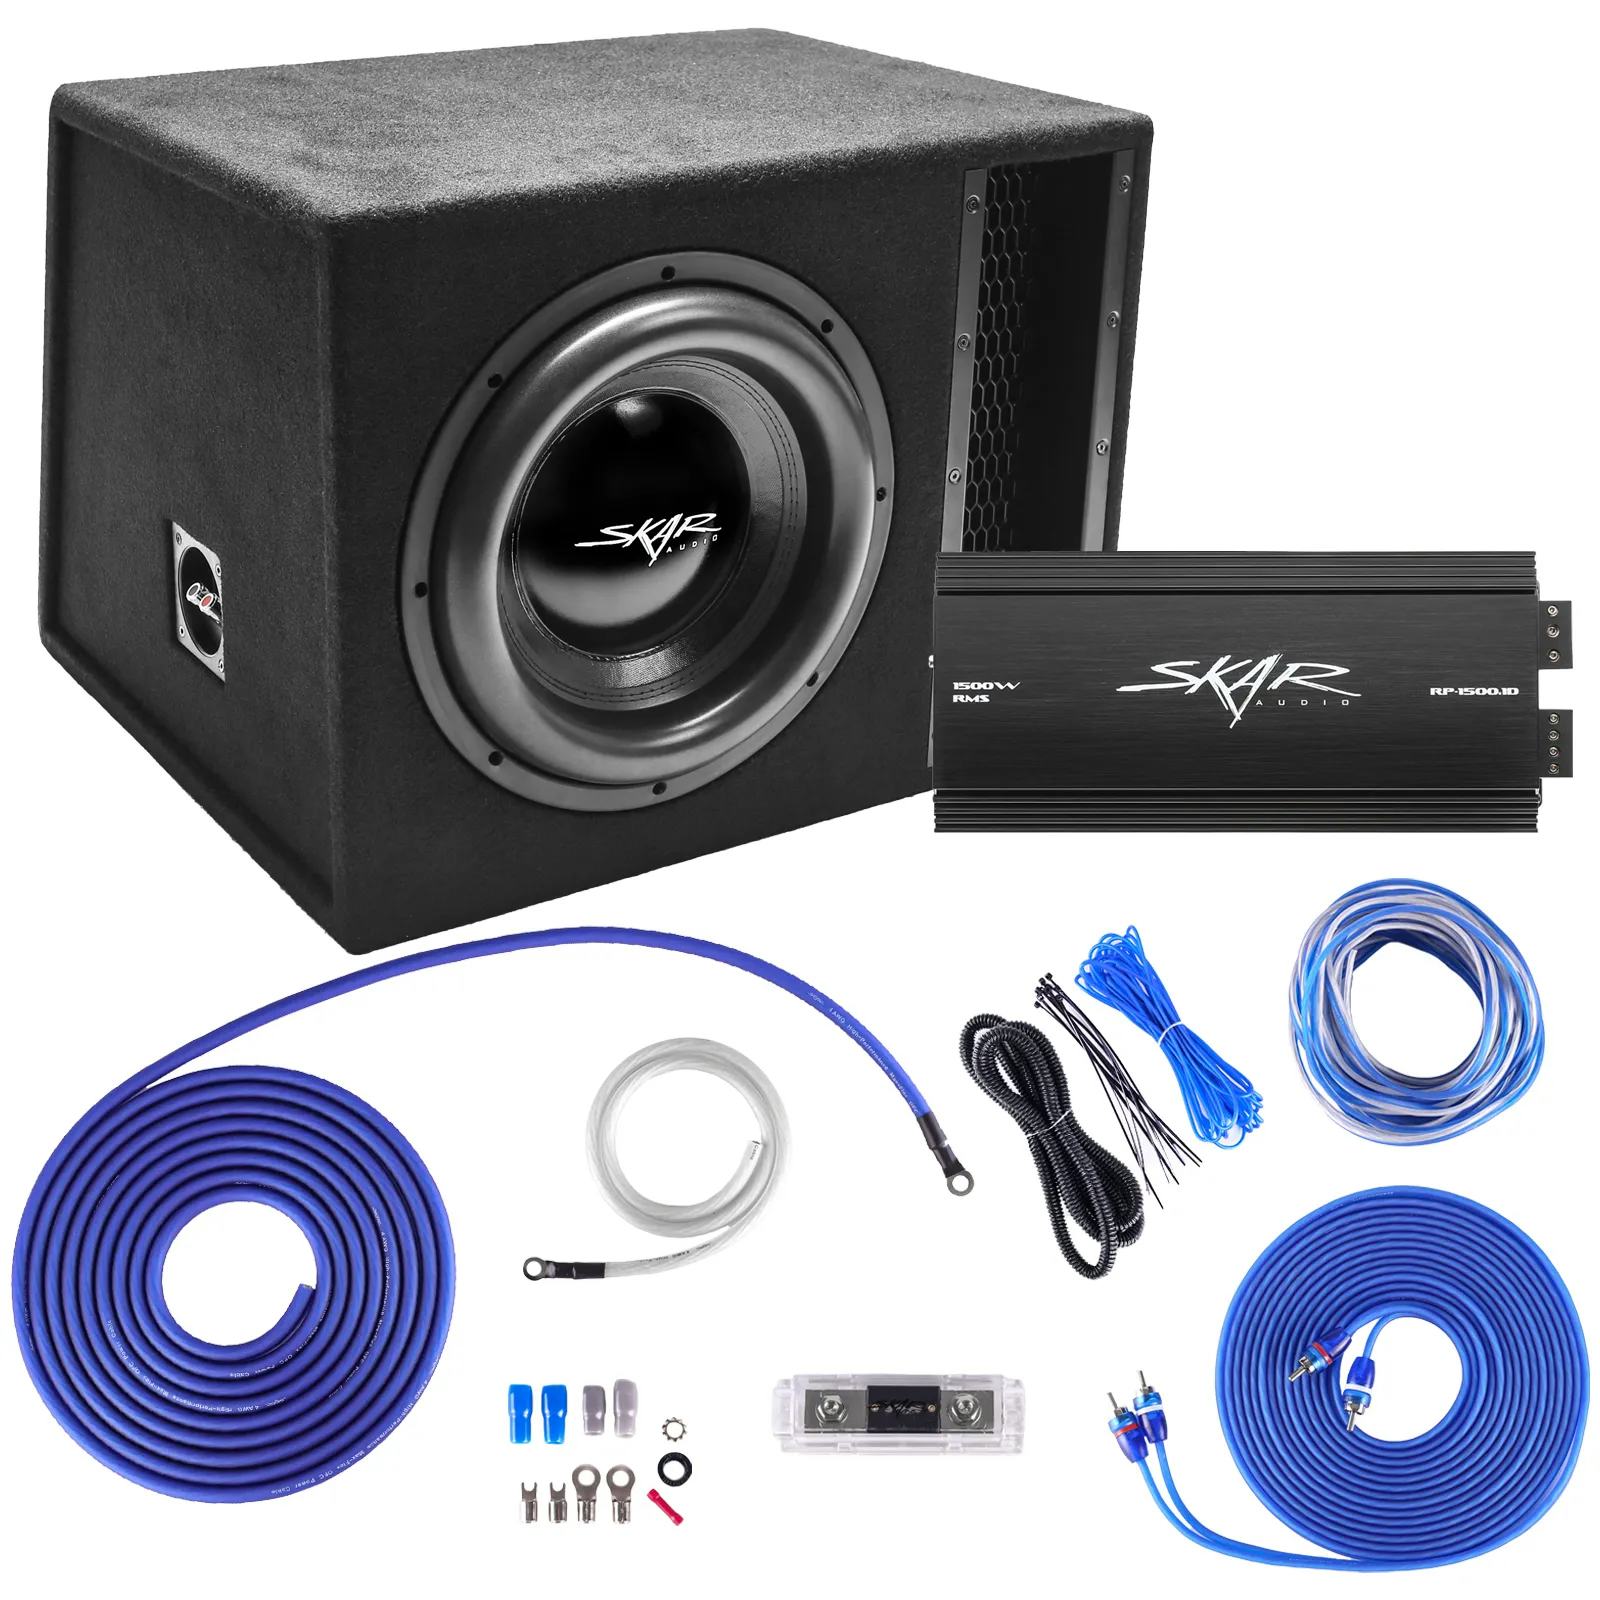 Single 12" 2,500 Watt EVL Series Complete Subwoofer Package with Vented Enclosure and Amplifier #1